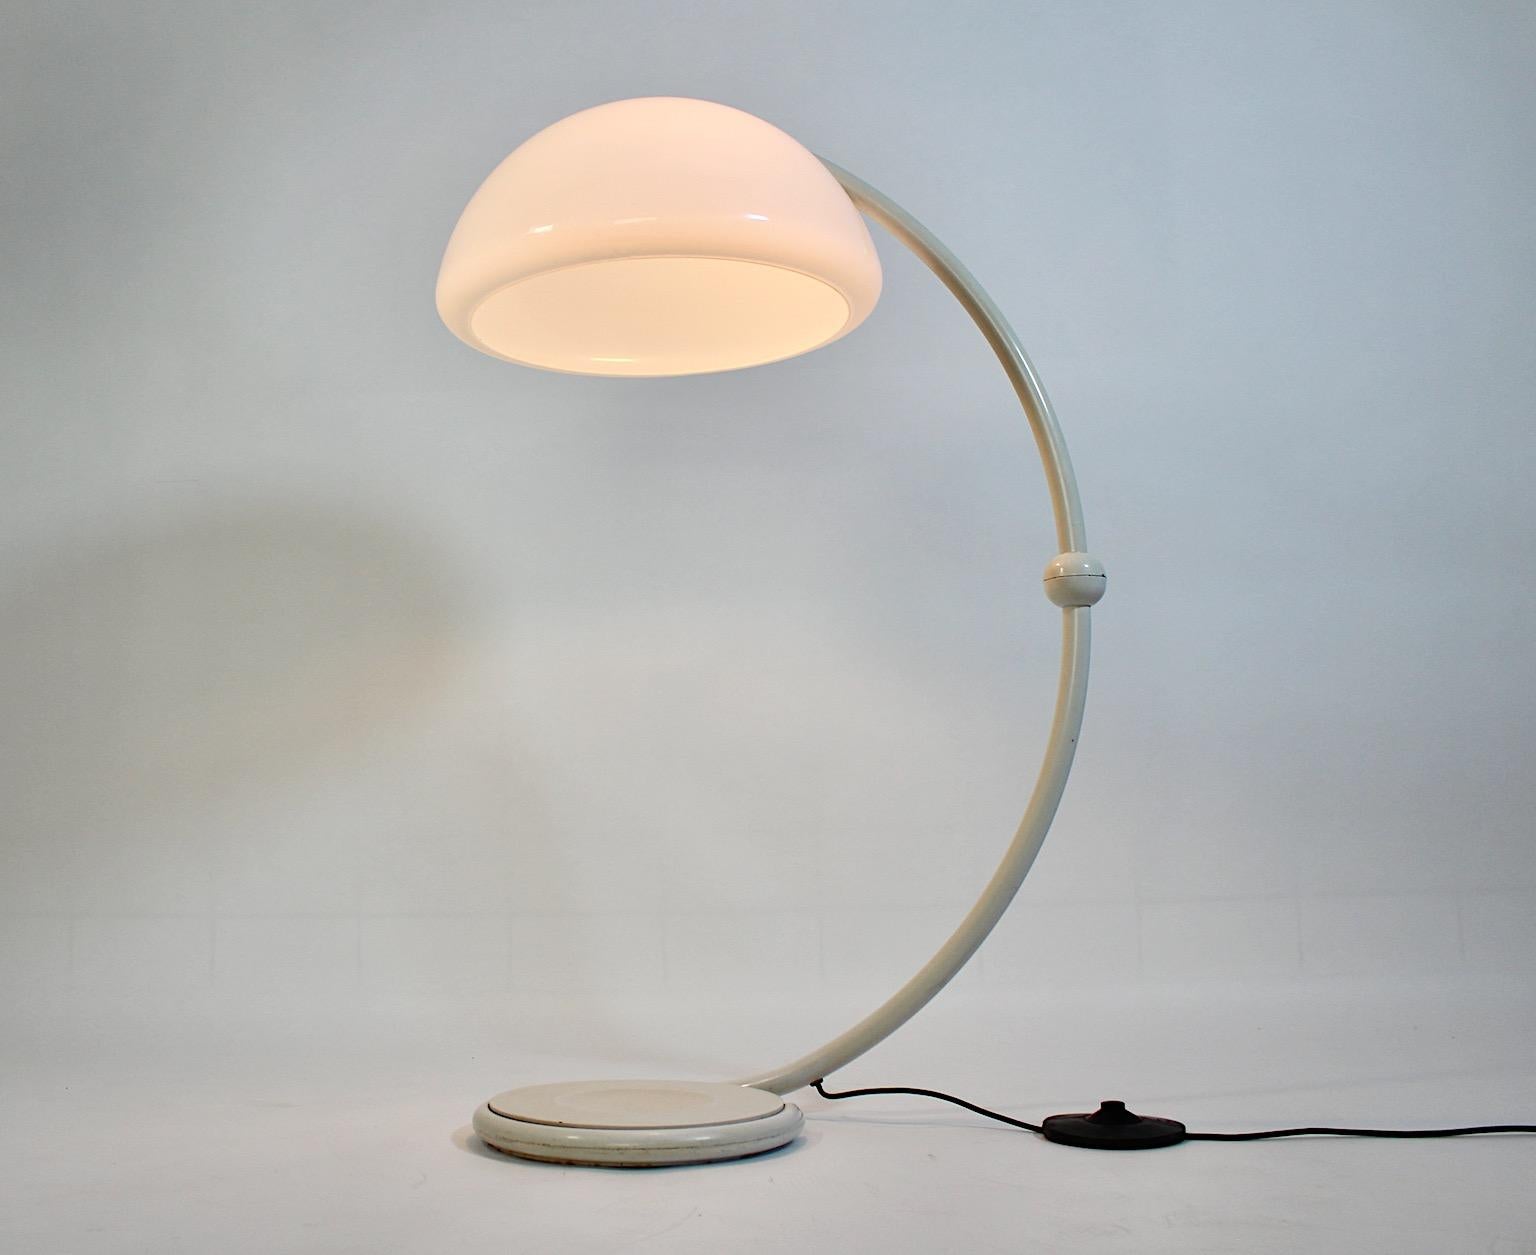 Space Age vintage floor lamp Serpente from white plastic and metal by 
Elio Martinelli Italy, 1970s.
An iconic vintage floor lamp, the floor lamp Serpente by Elio Martinelli, all in white, the stem, base and the lamp shade.
With a popular and iconic